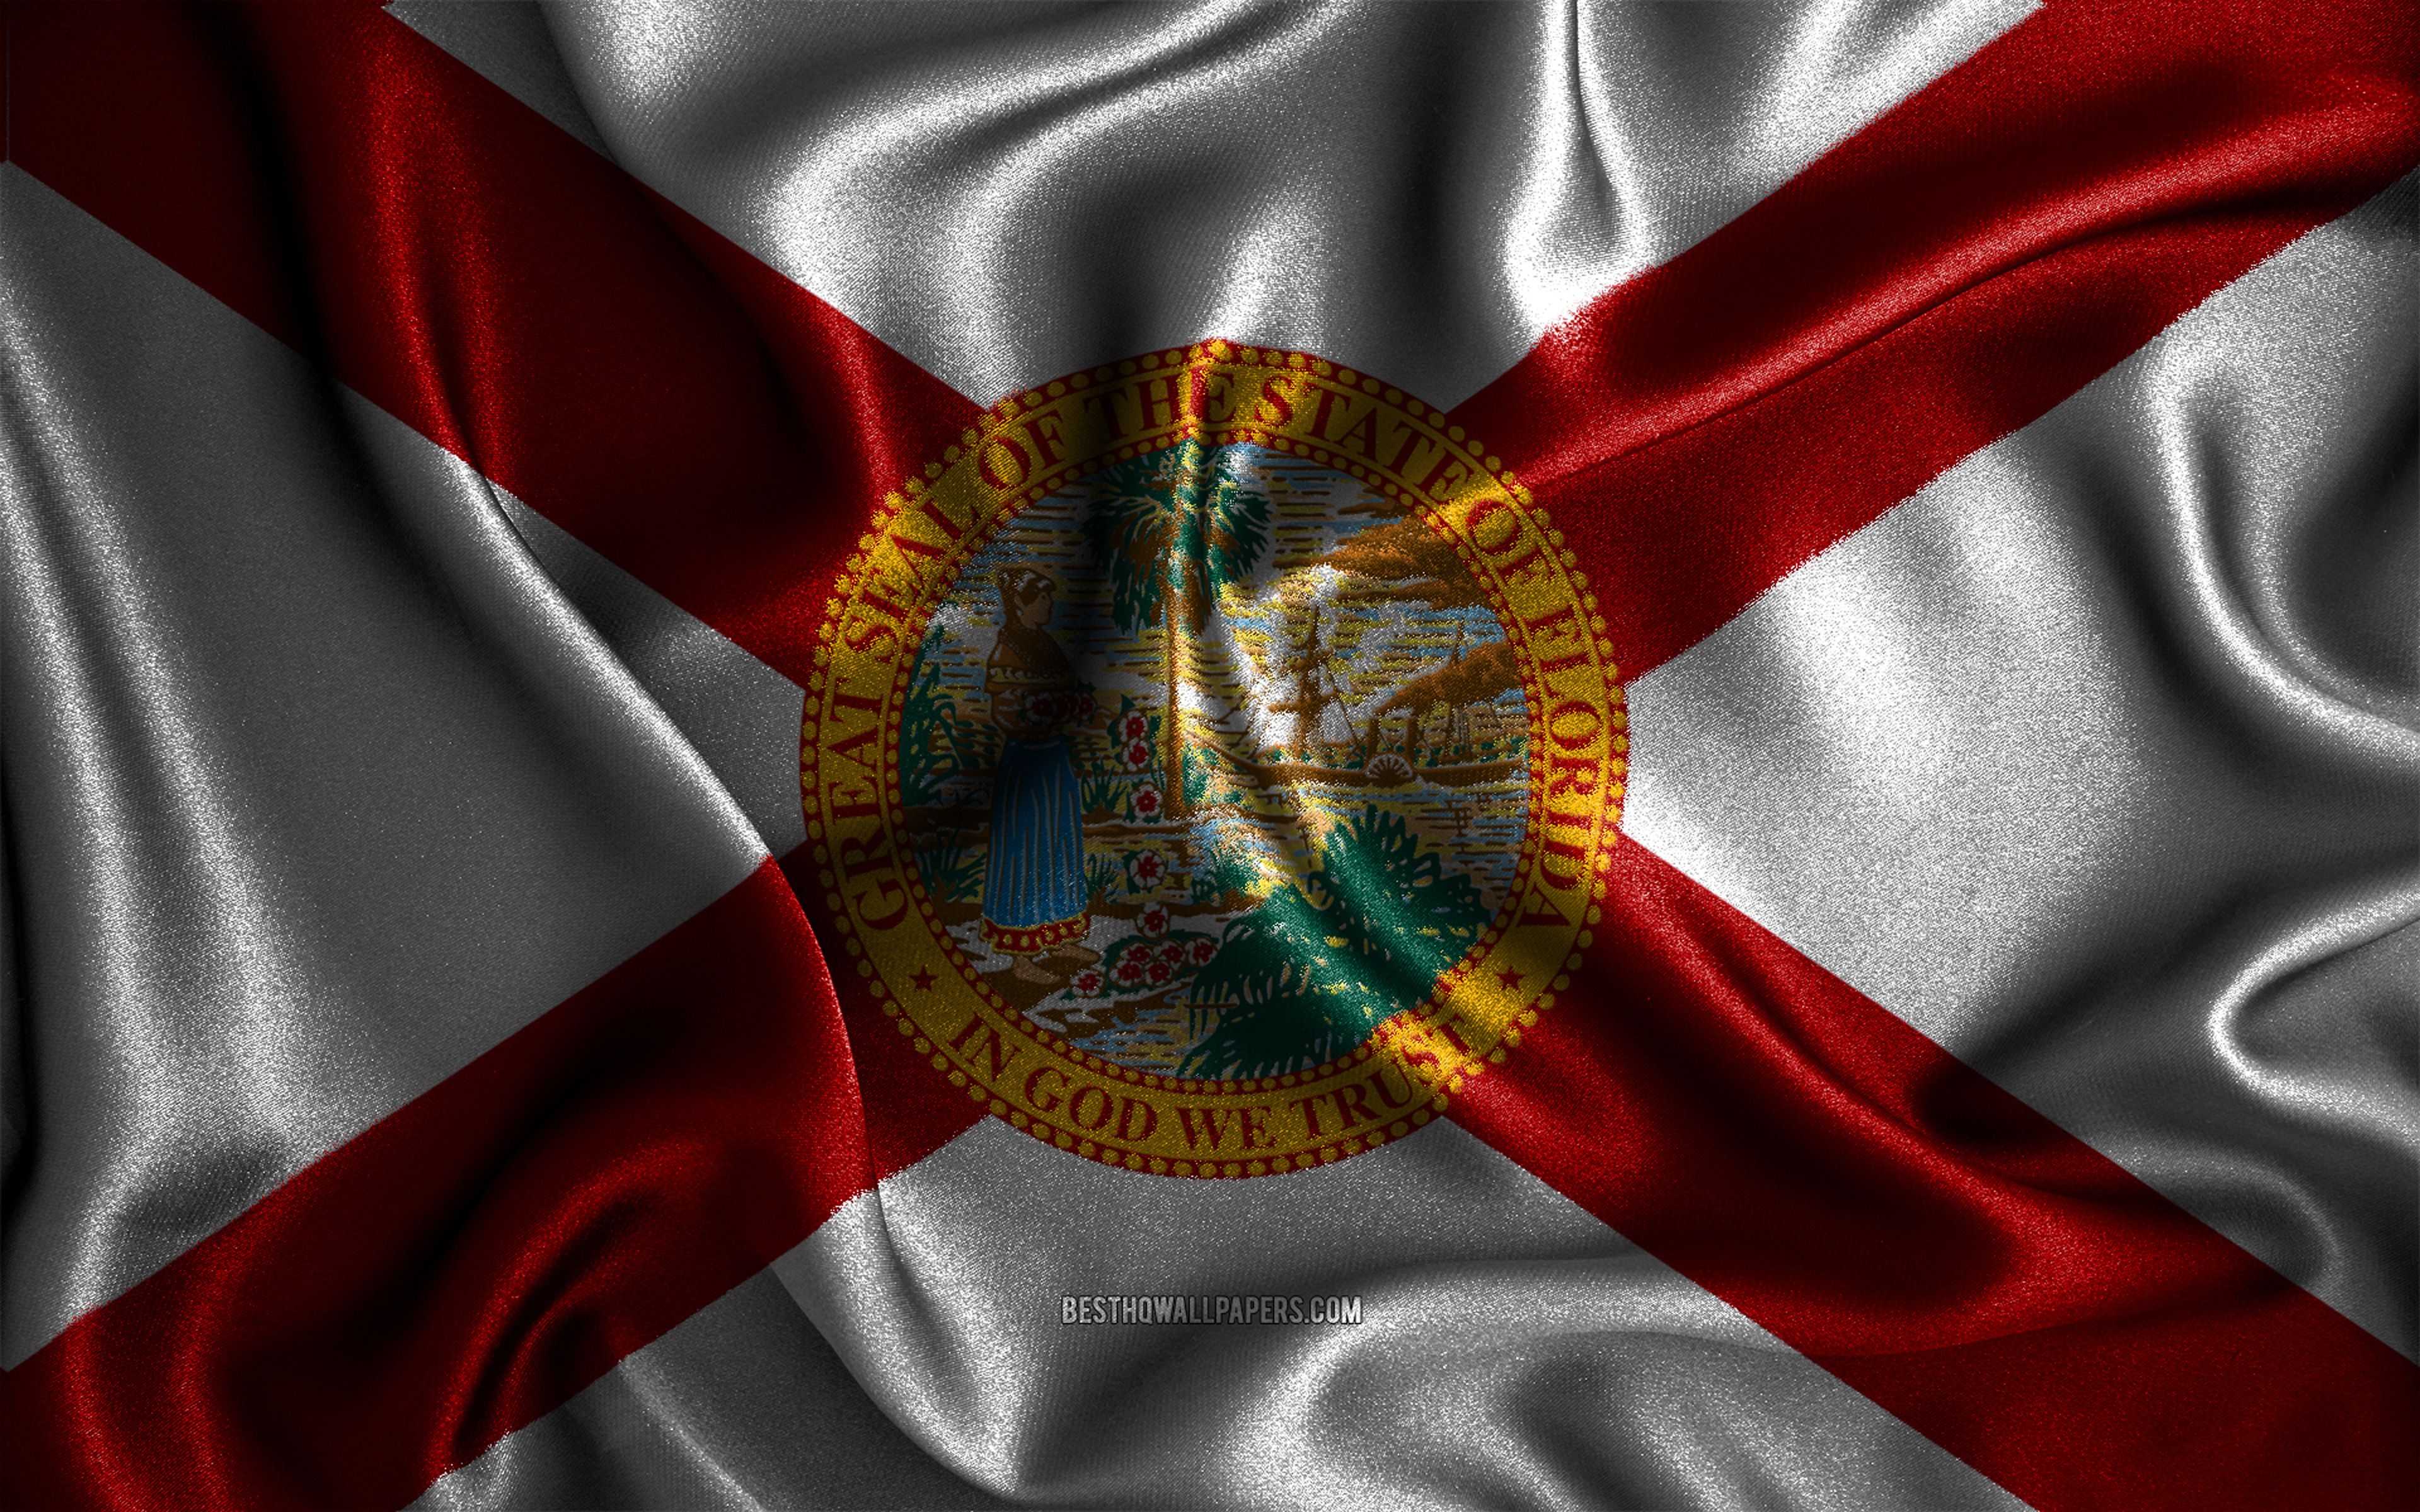 Download wallpaper Florida flag, 4k, silk wavy flags, american states, USA, Flag of Florida, fabric flags, 3D art, Florida, United States of America, Florida 3D flag, US states for desktop with resolution